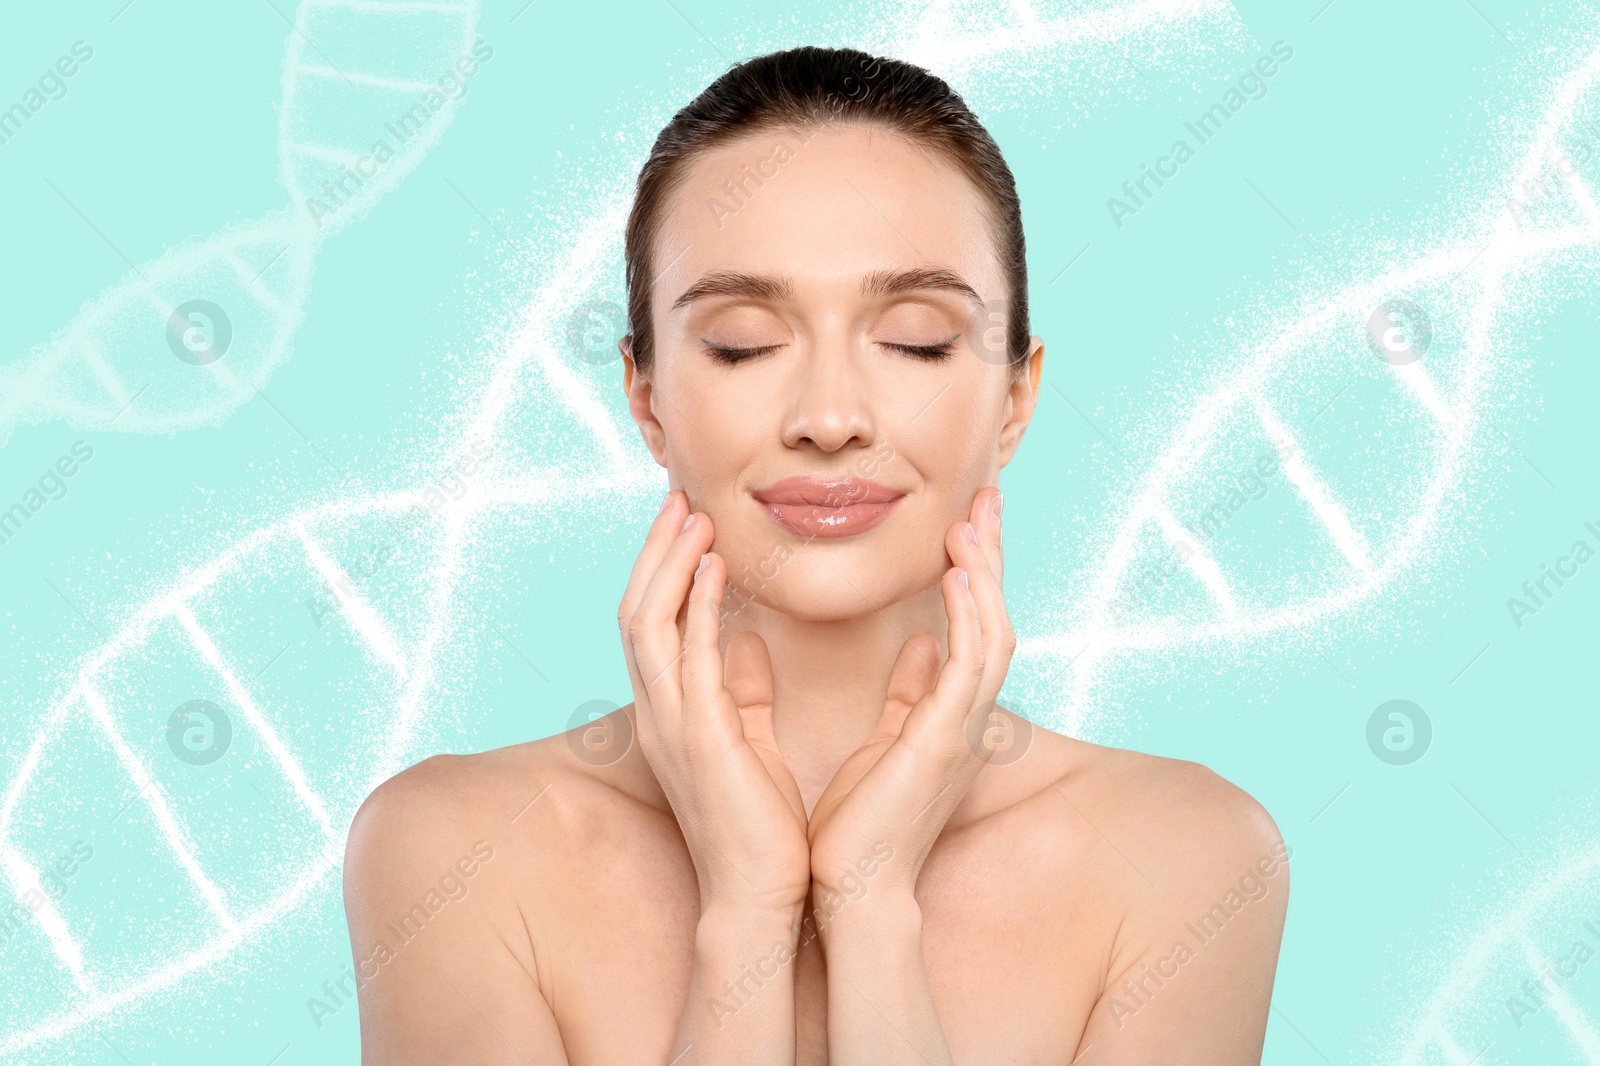 Image of Beautiful young woman against light turquoise background with illustration of DNA chains